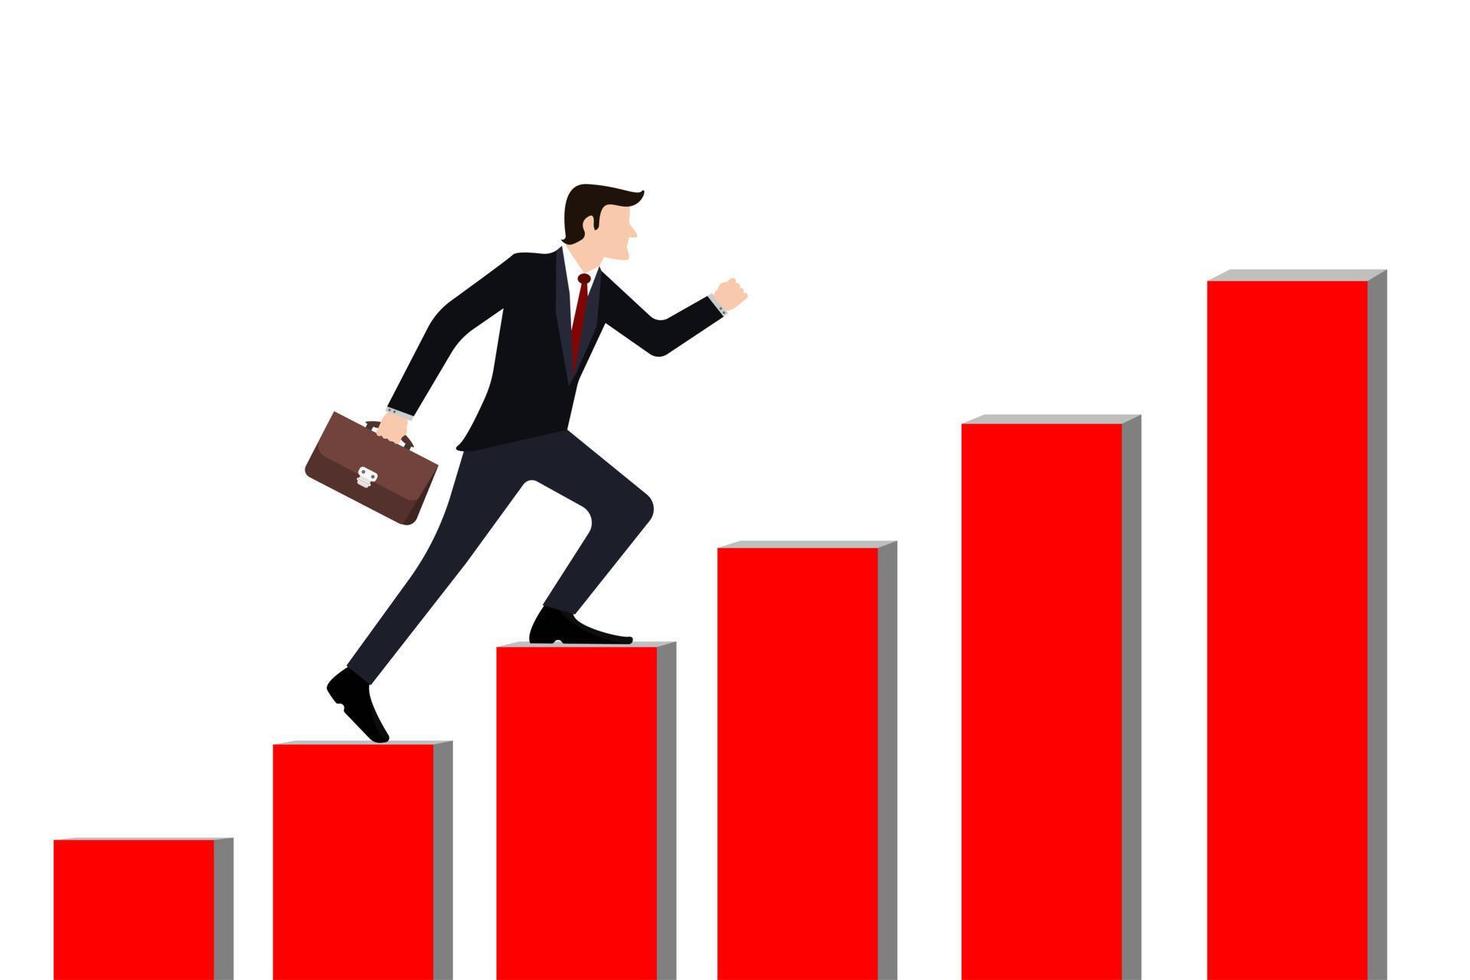 Businessman steps up stairs according to level. concept of self-improvement and growth to career success. Choosing path to successful business goals. vector illustration